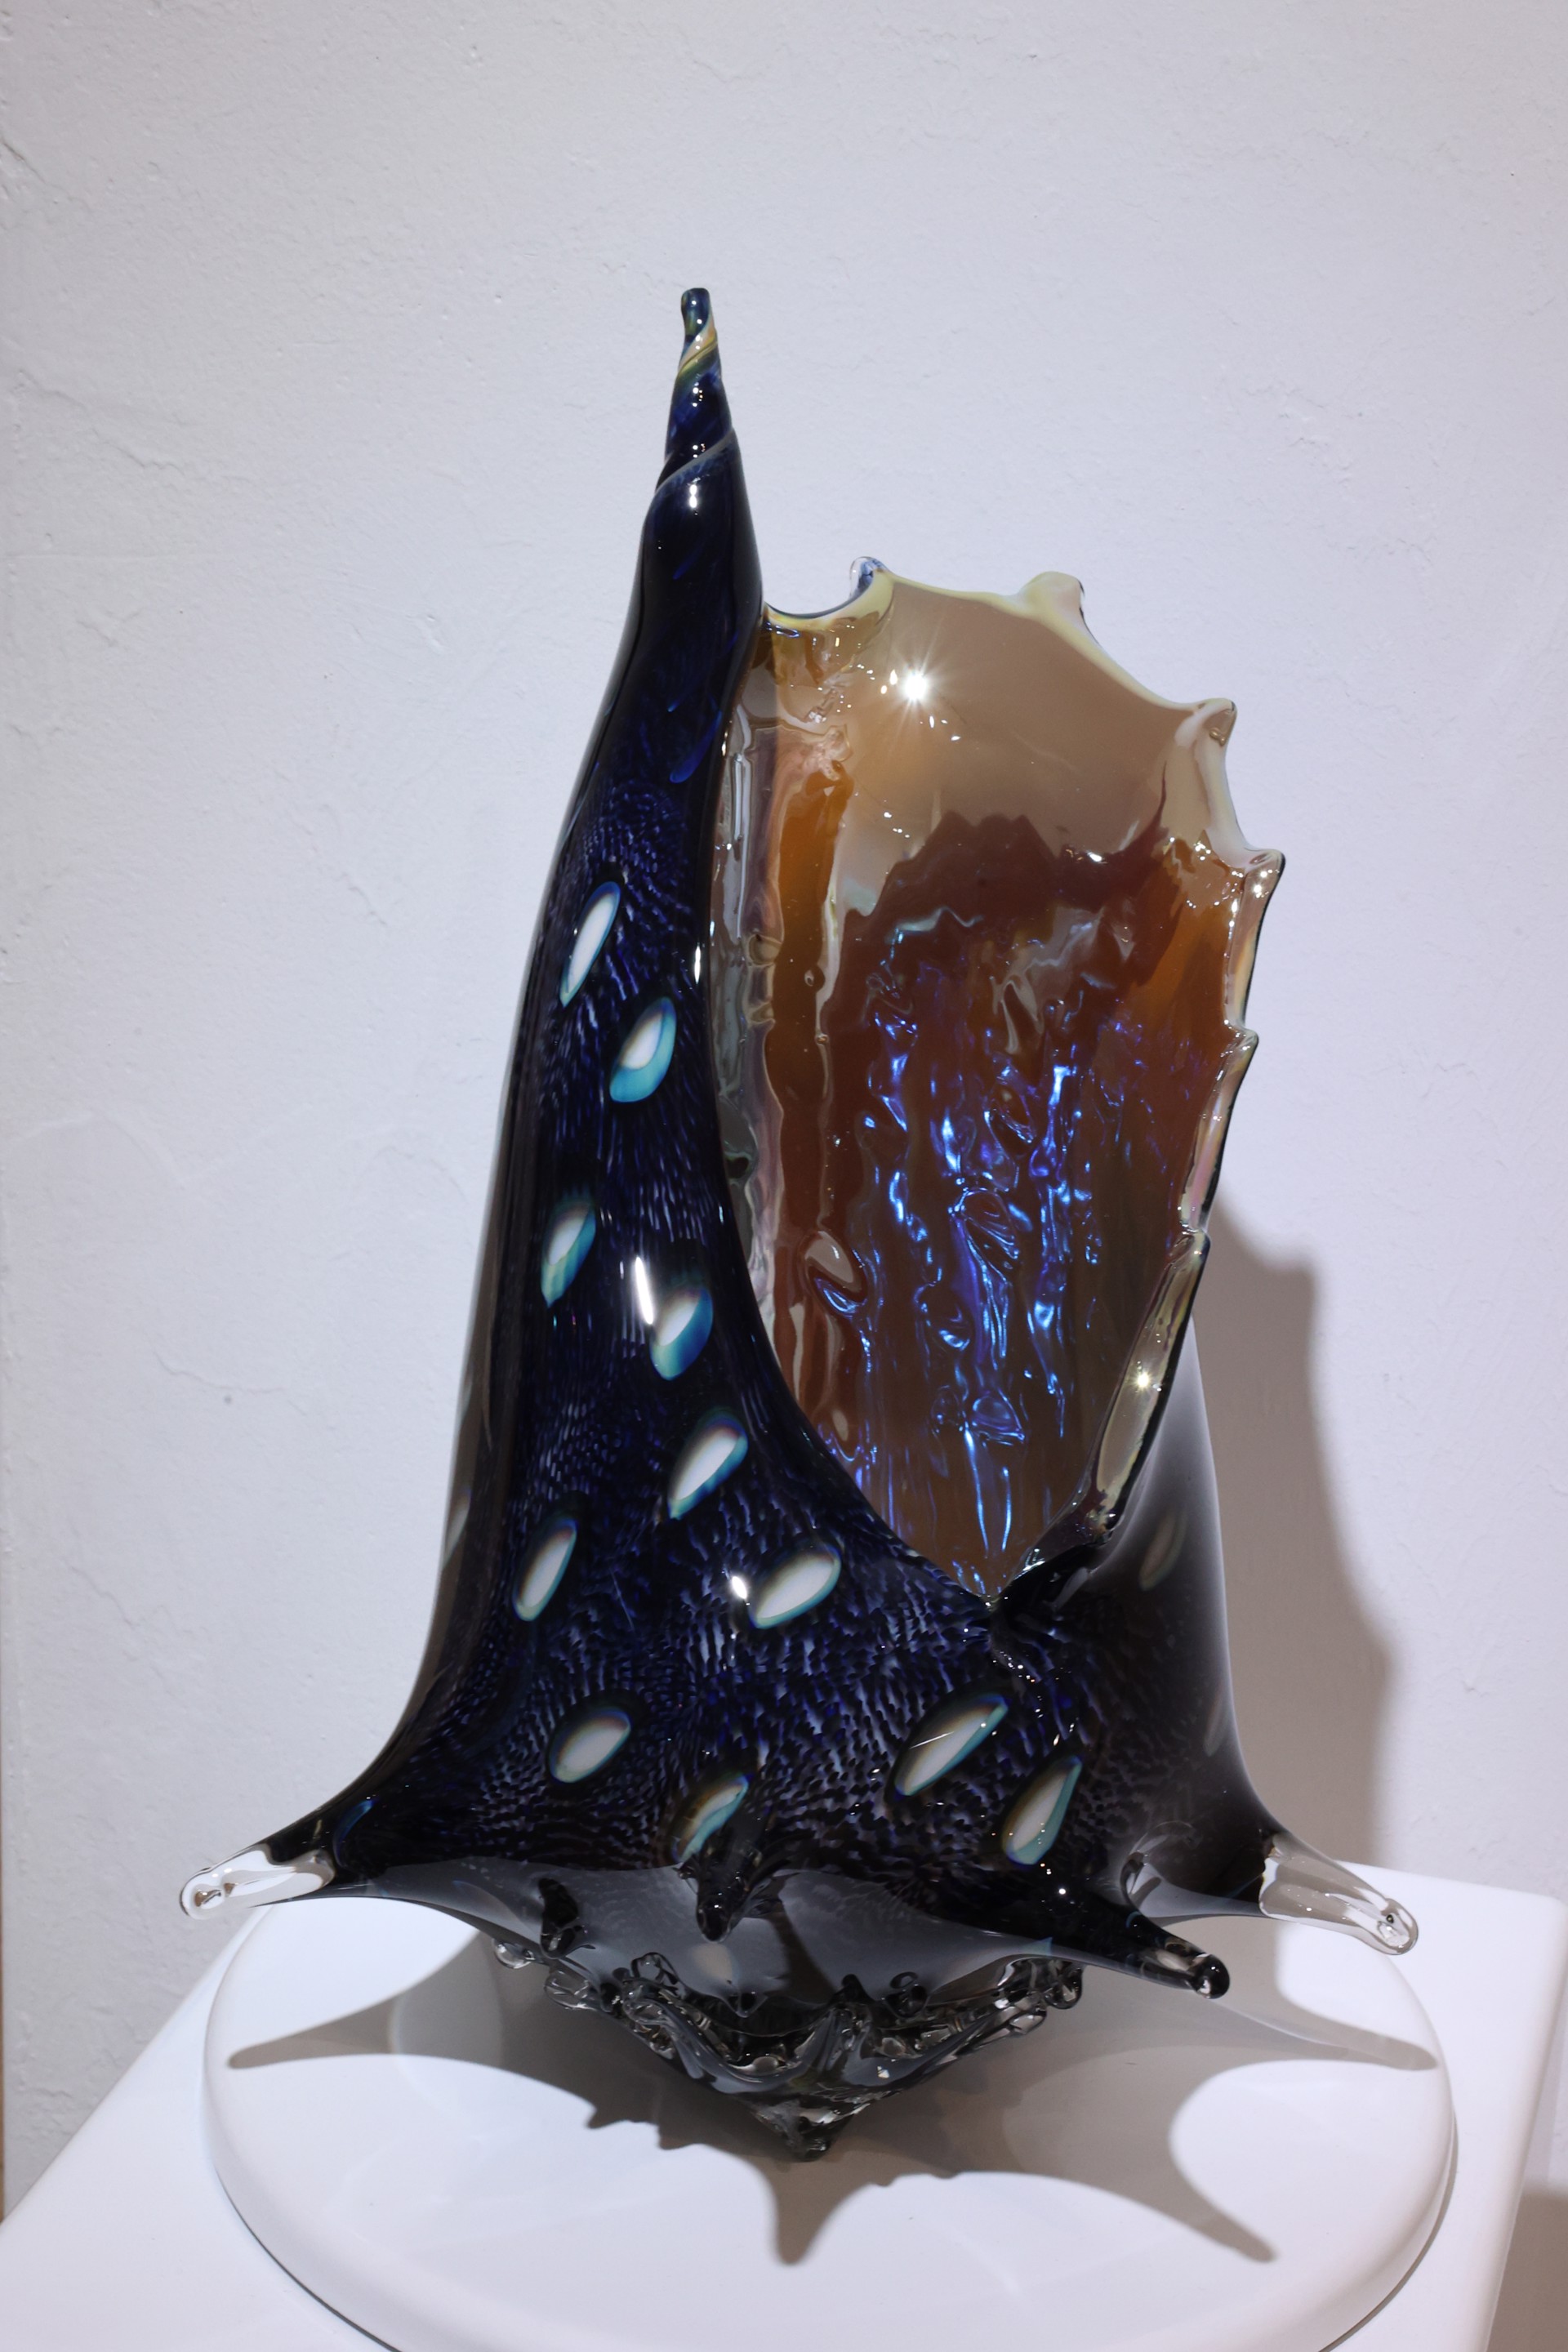 "Dark Blue Conch" by Andrew Libecki